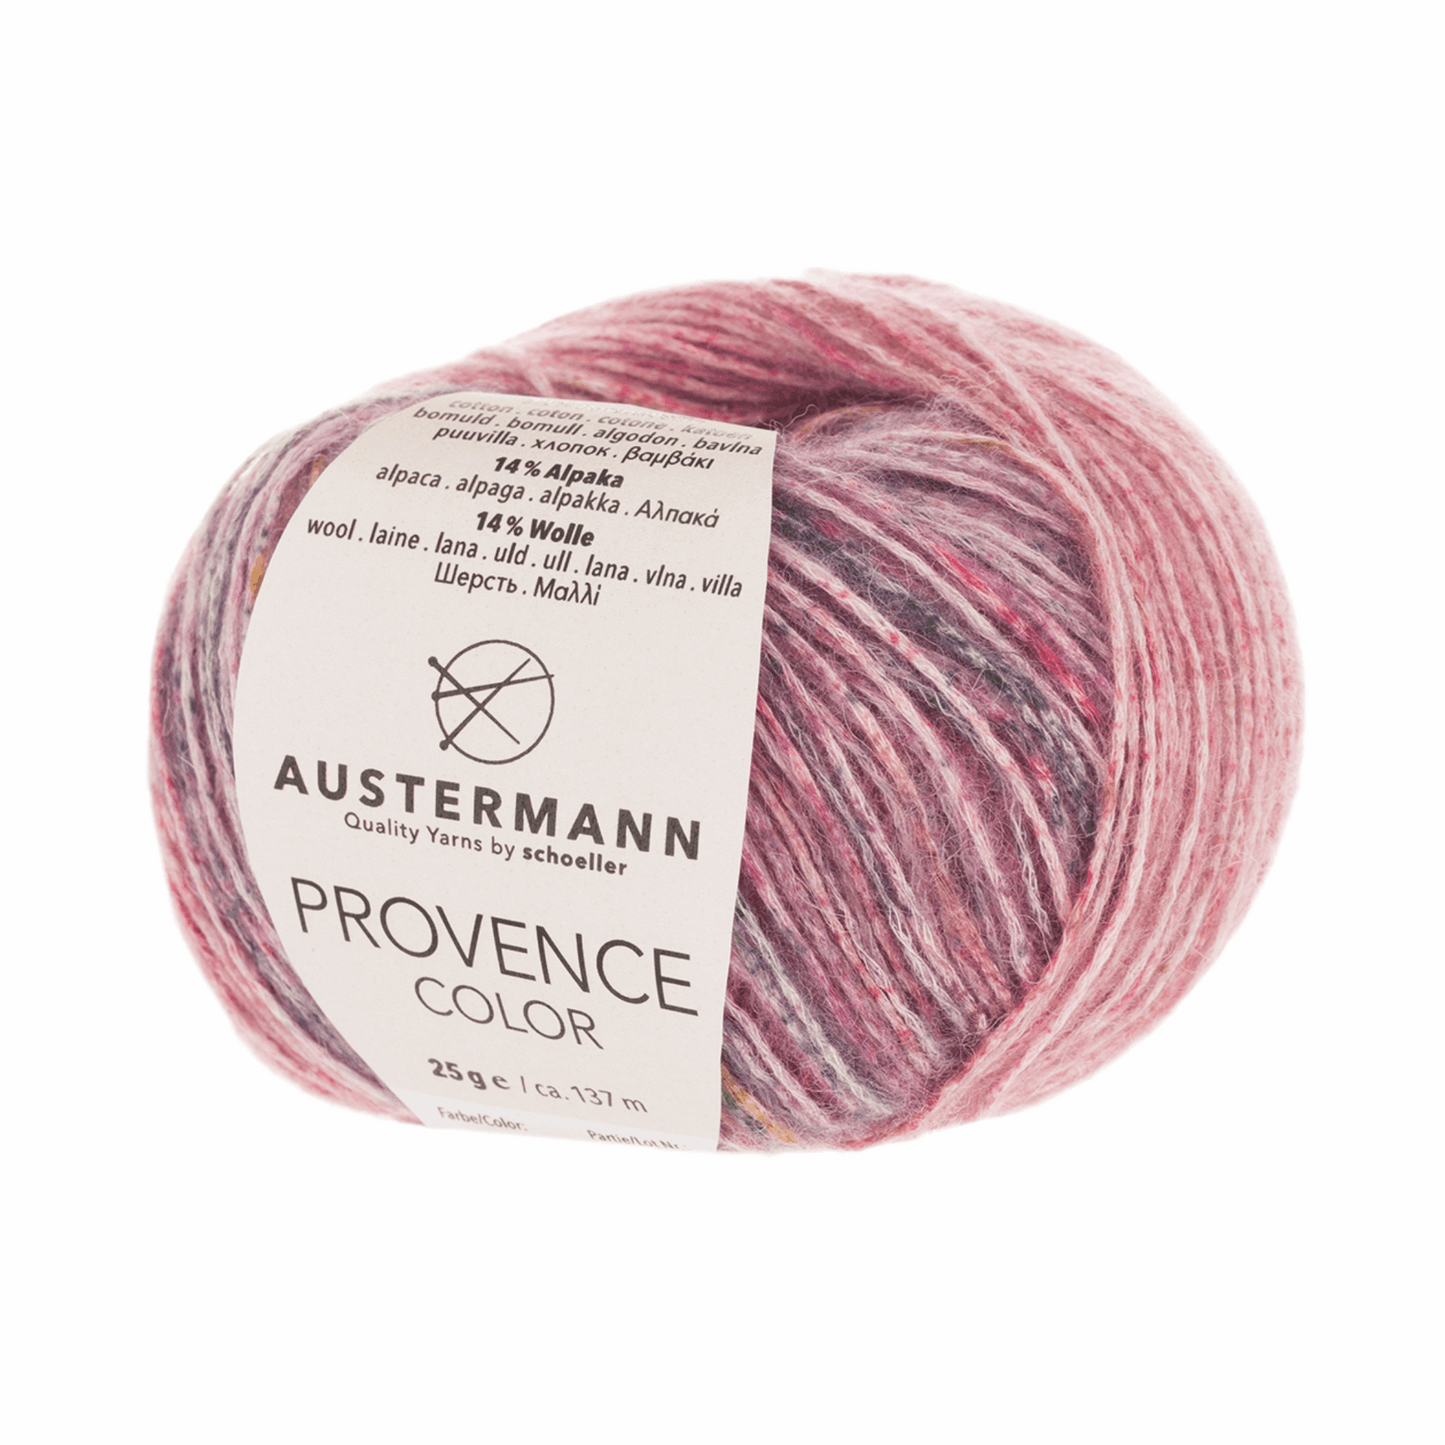 Provence Color 25g, 90304, Farbe 7, beere